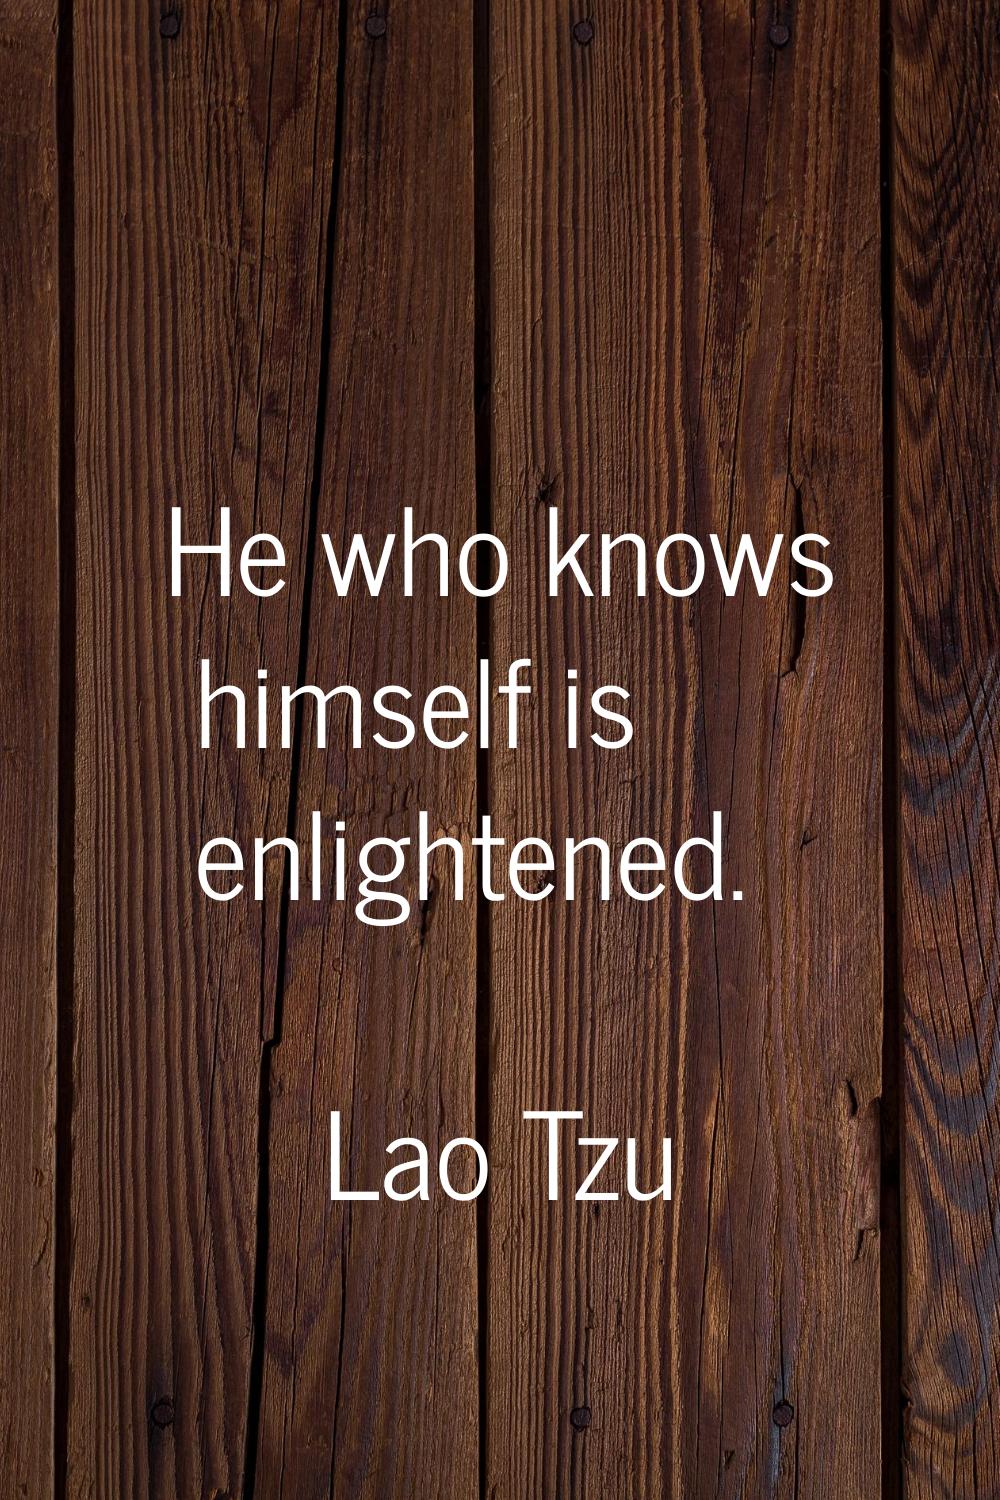 He who knows himself is enlightened.